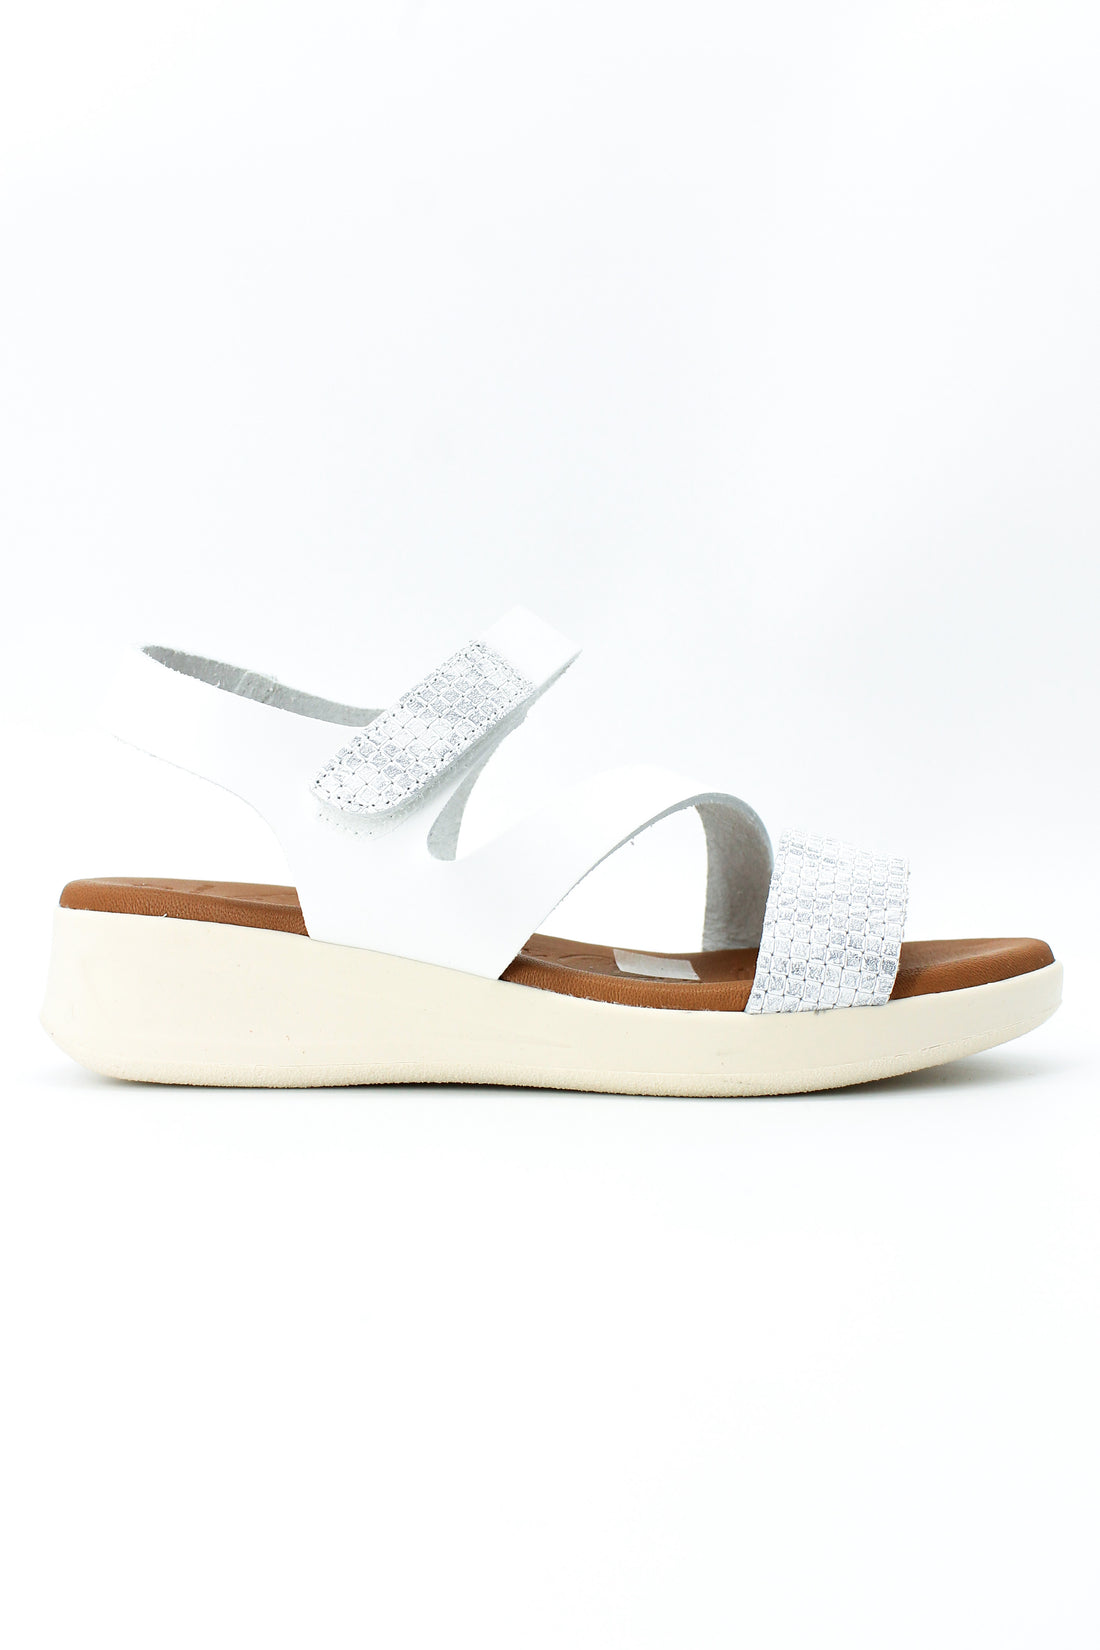 Oh My Sandals 5182 White and Silver